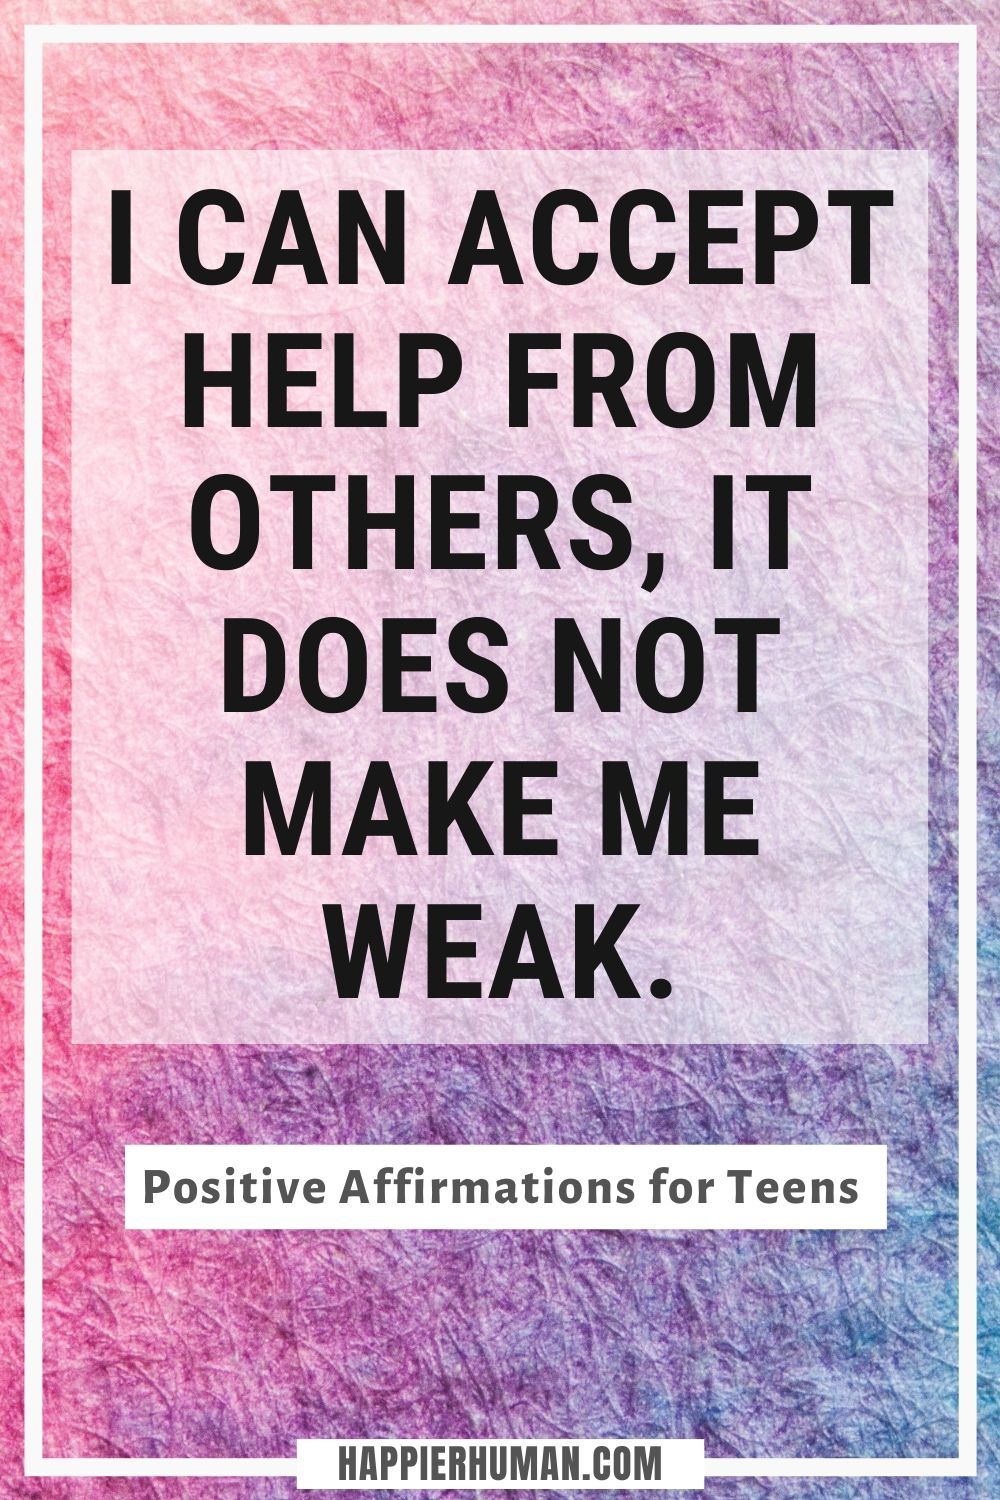 Positive Affirmations for Teens - I can accept help from others, it does not make me weak. | affirmations for students from teachers | affirmation child development | positive affirmations for my son #qotd #quotes #affirm